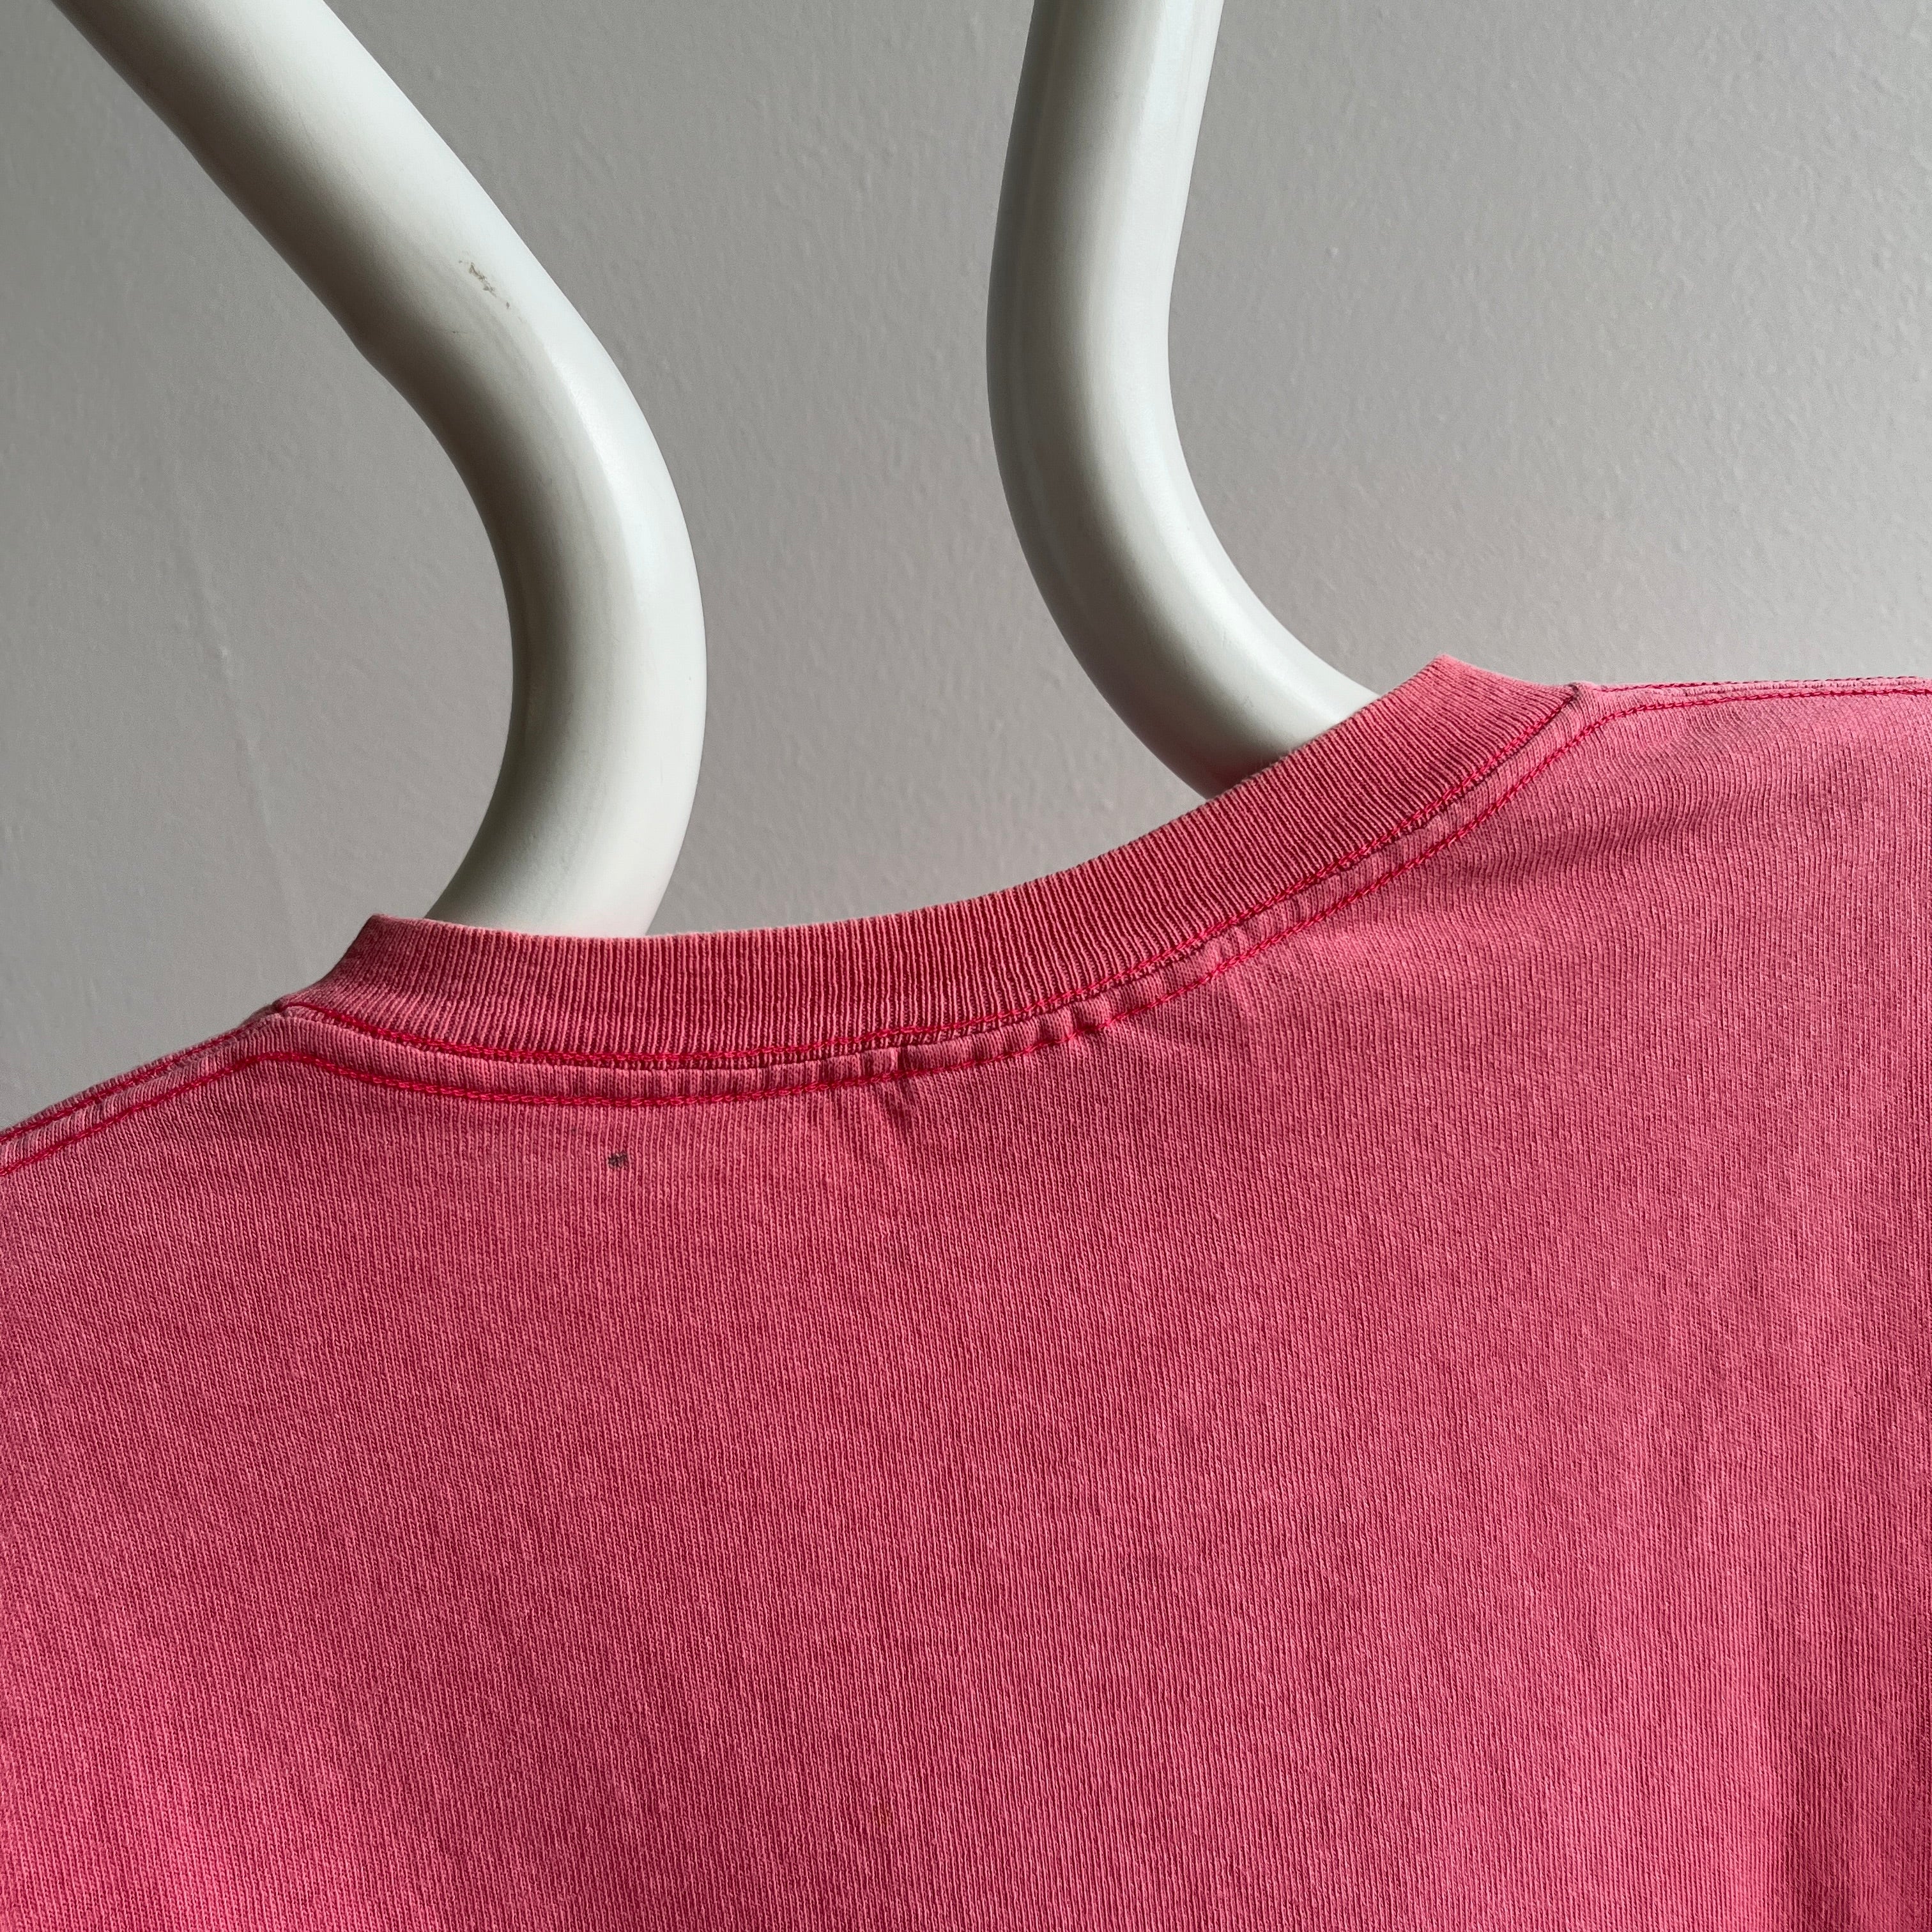 1980s The Perfect Sun Faded Salmon Pocket Cotton T-Shirt